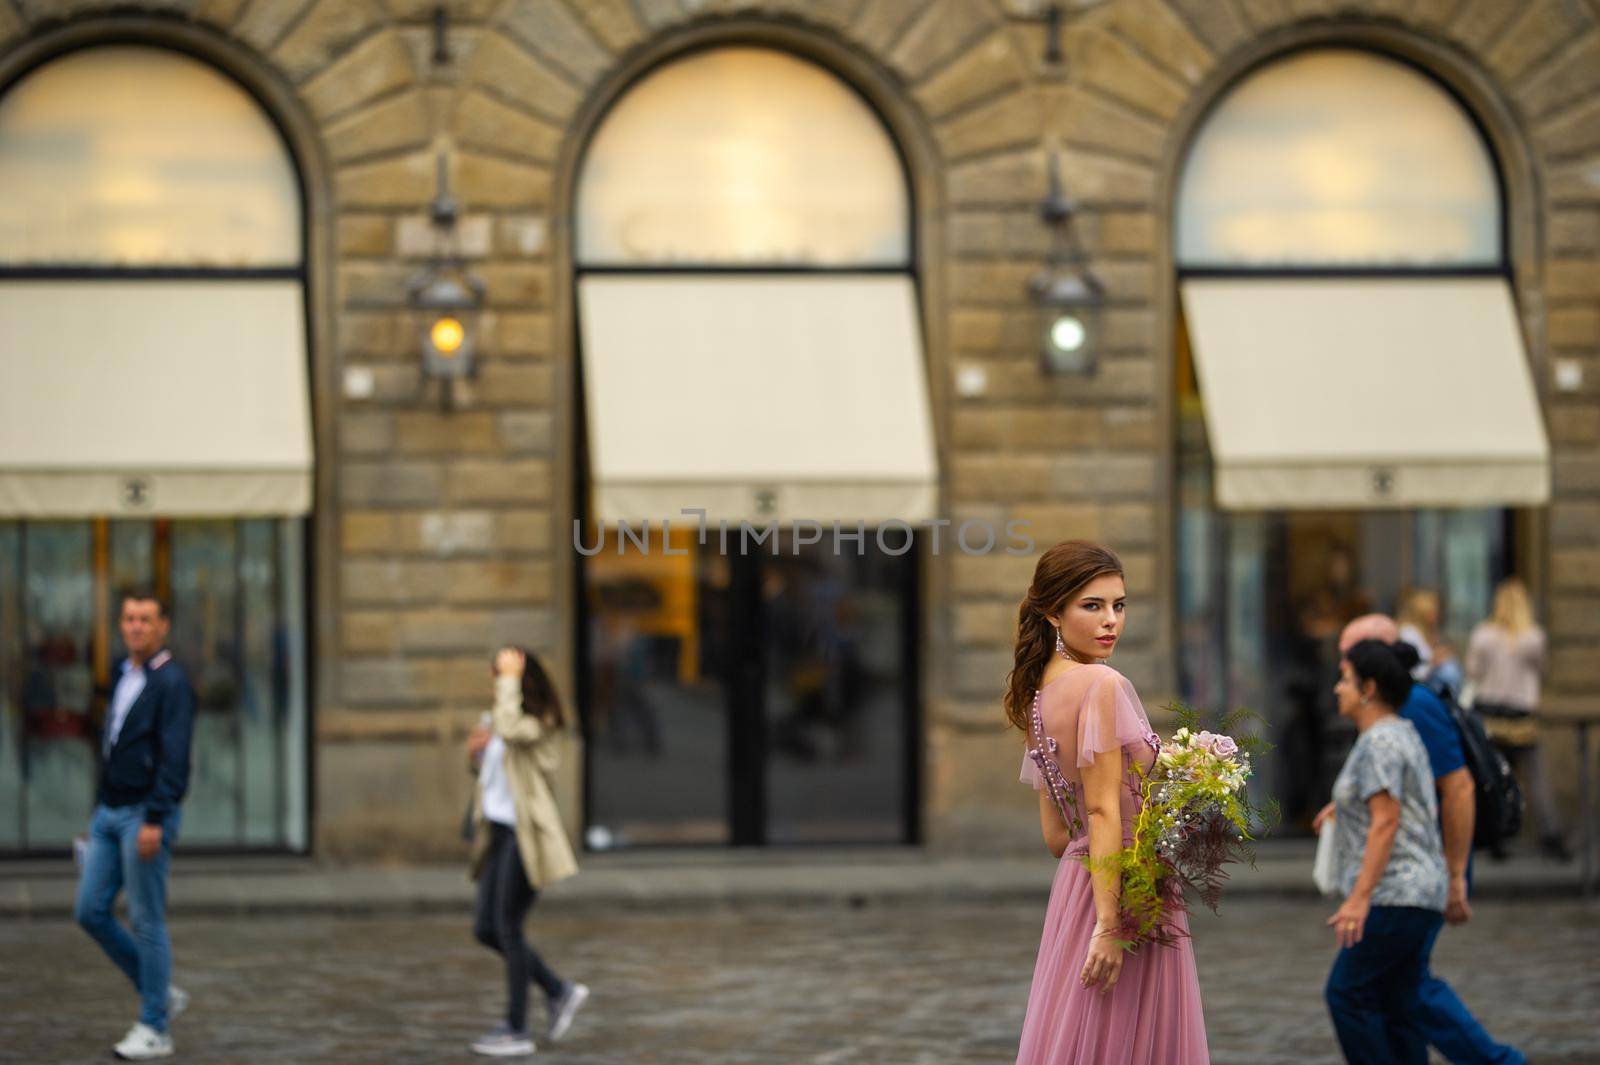 A bride in a pink dress with a bouquet stands in the center of the Old City of Florence in Italy.